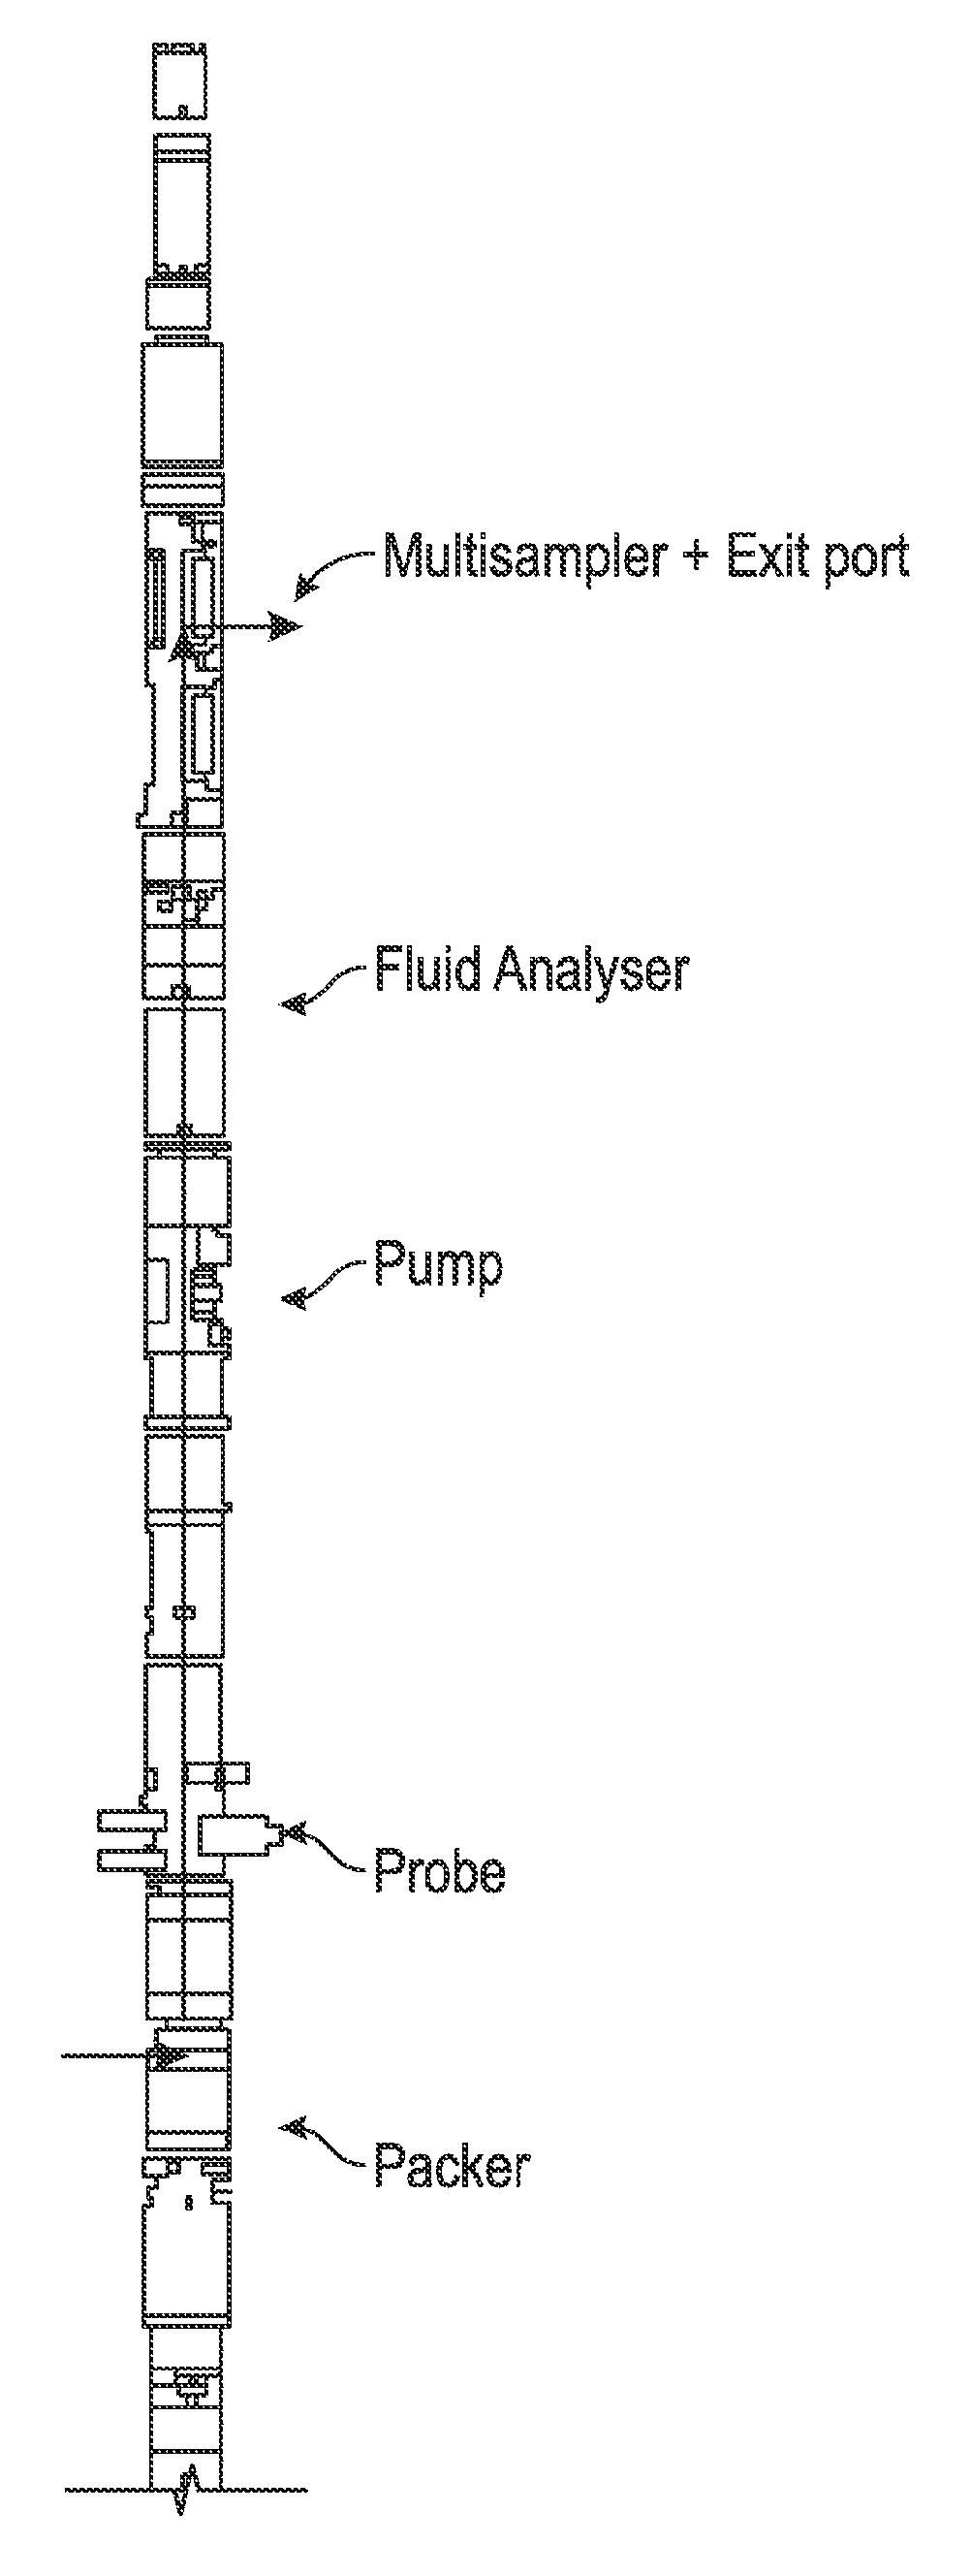 Formation tester interval pressure transient test and apparatus